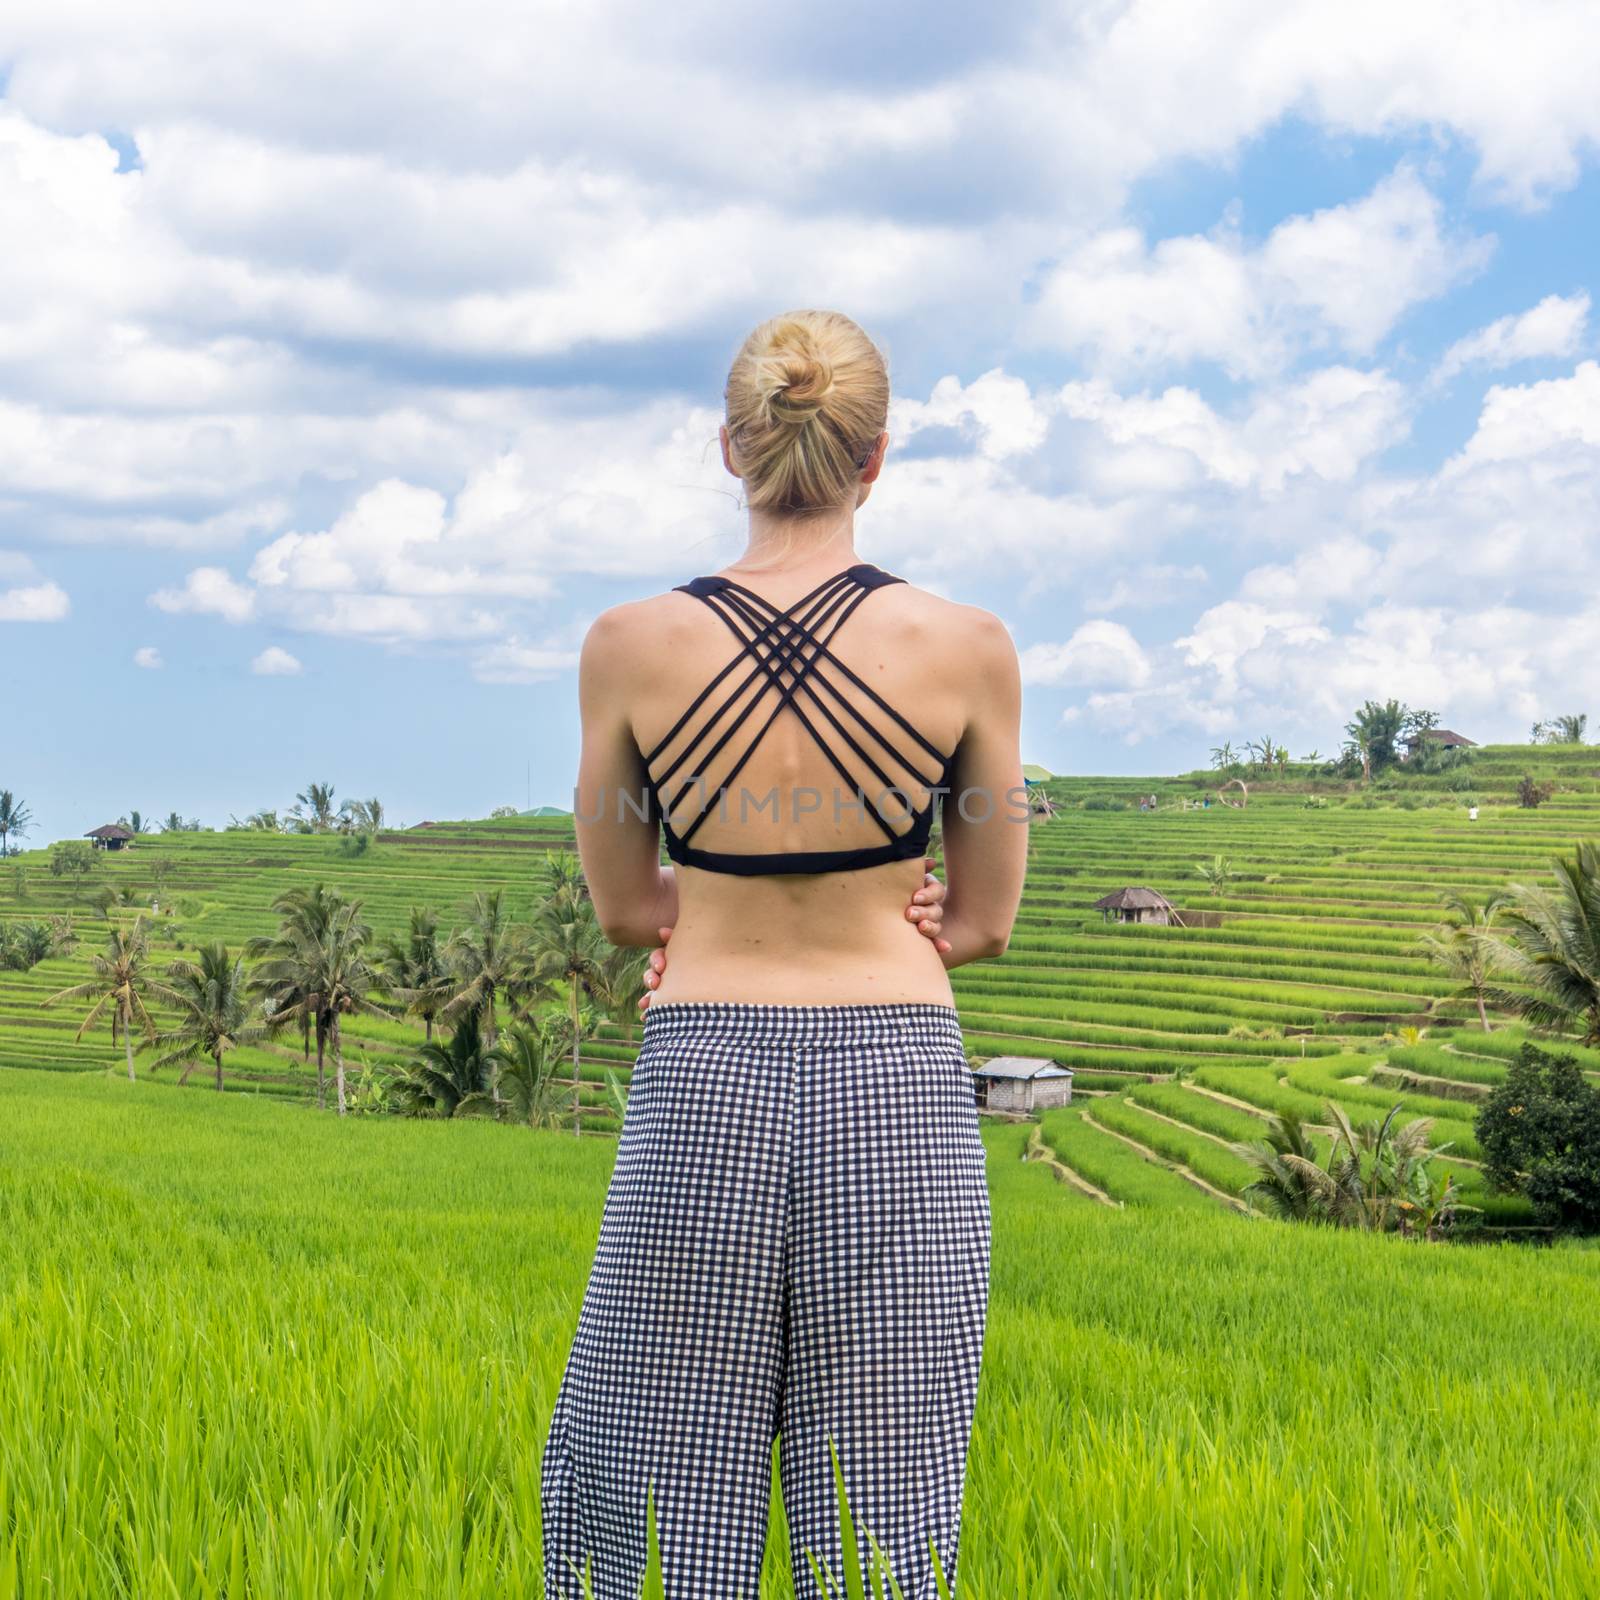 Relaxed sporty female traveler enjoying pure nature at beautiful Jatiluwih rice fields on Bali. Concept of sustainable tourism, nature enjoyment, balanced life, freedom, vacations and well being.